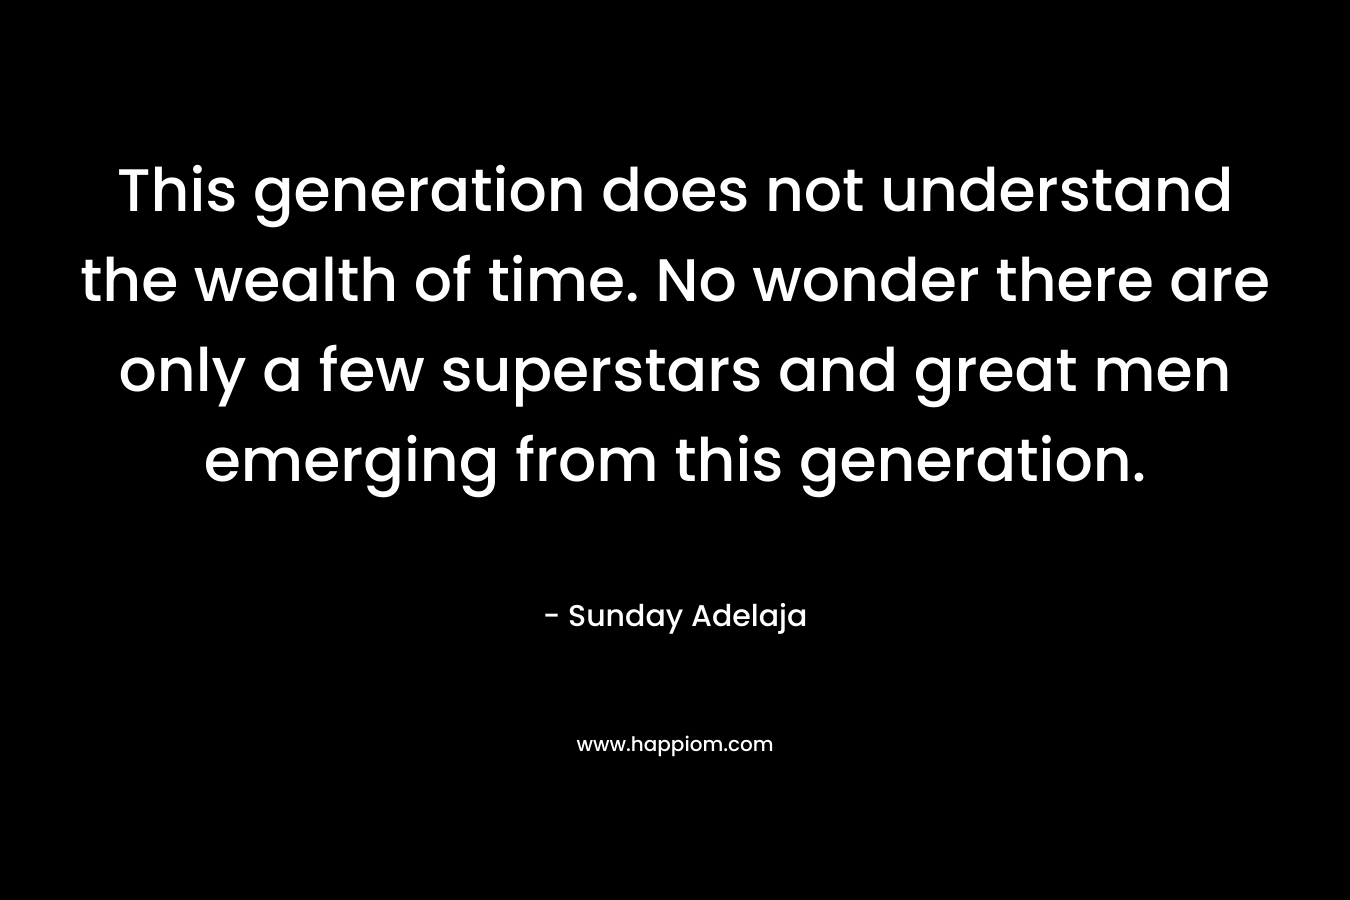 This generation does not understand the wealth of time. No wonder there are only a few superstars and great men emerging from this generation.